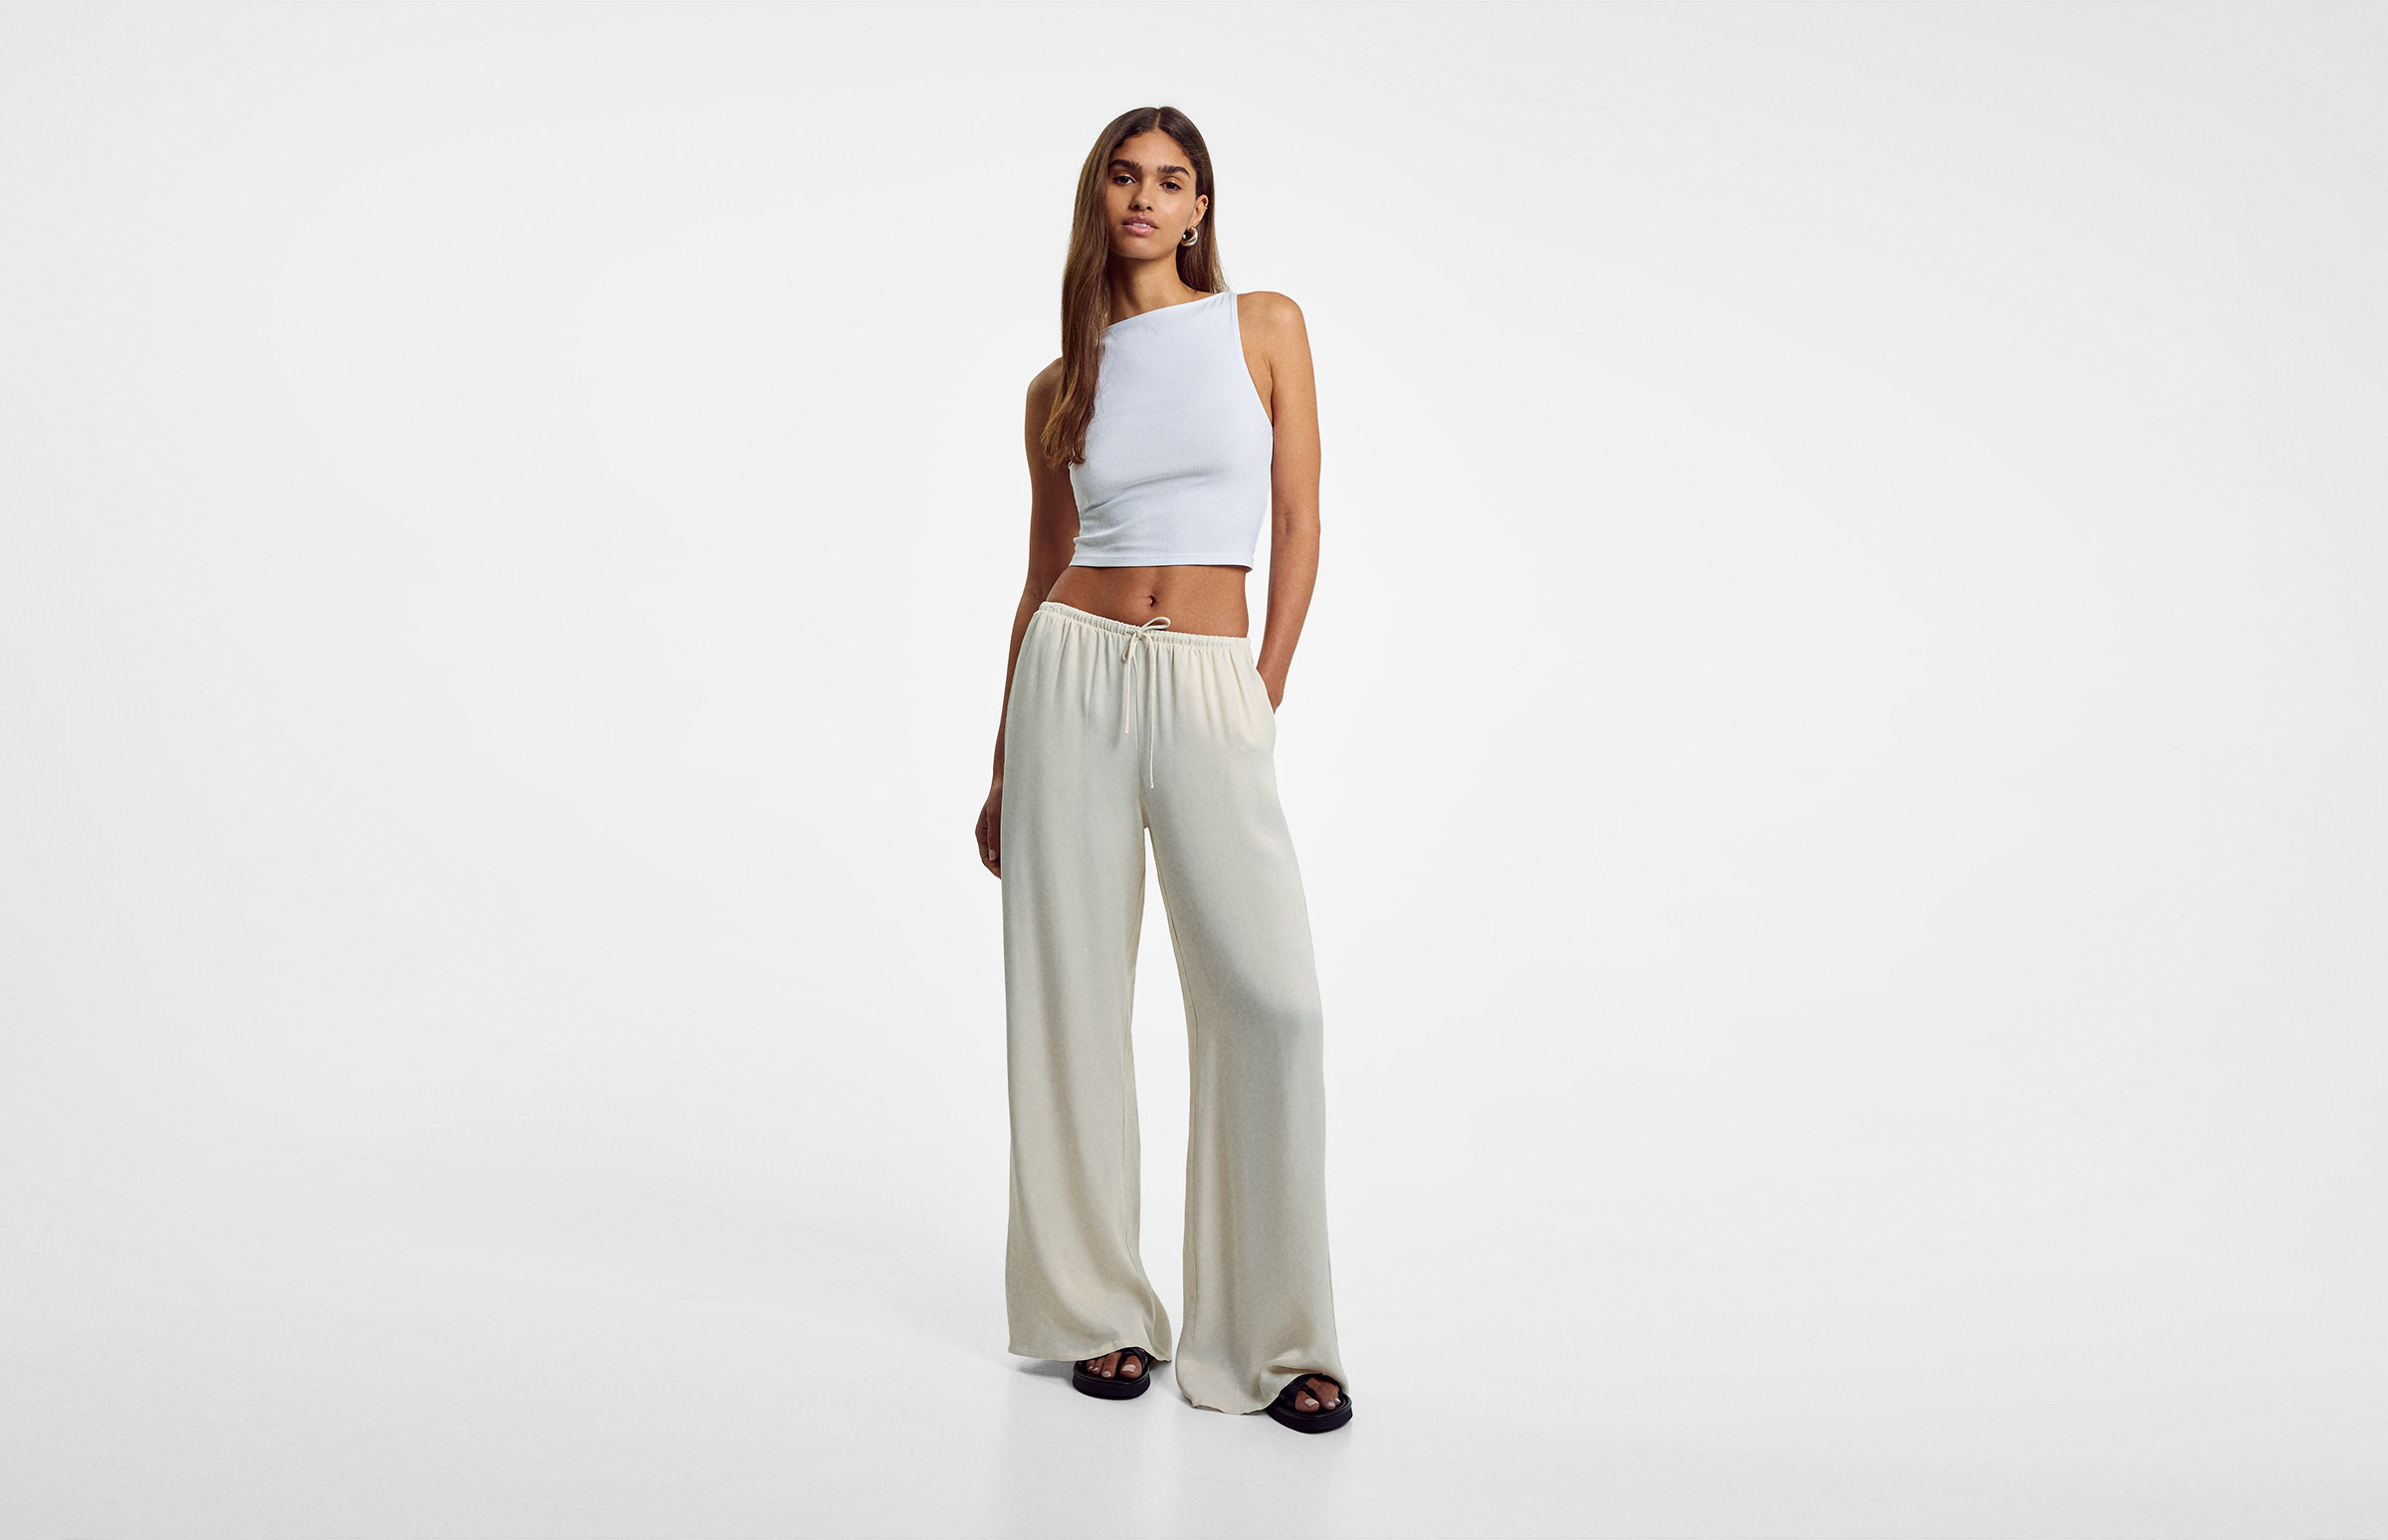 Honest review of Bershka linen trousers 🤎, Gallery posted by Katiesfitz